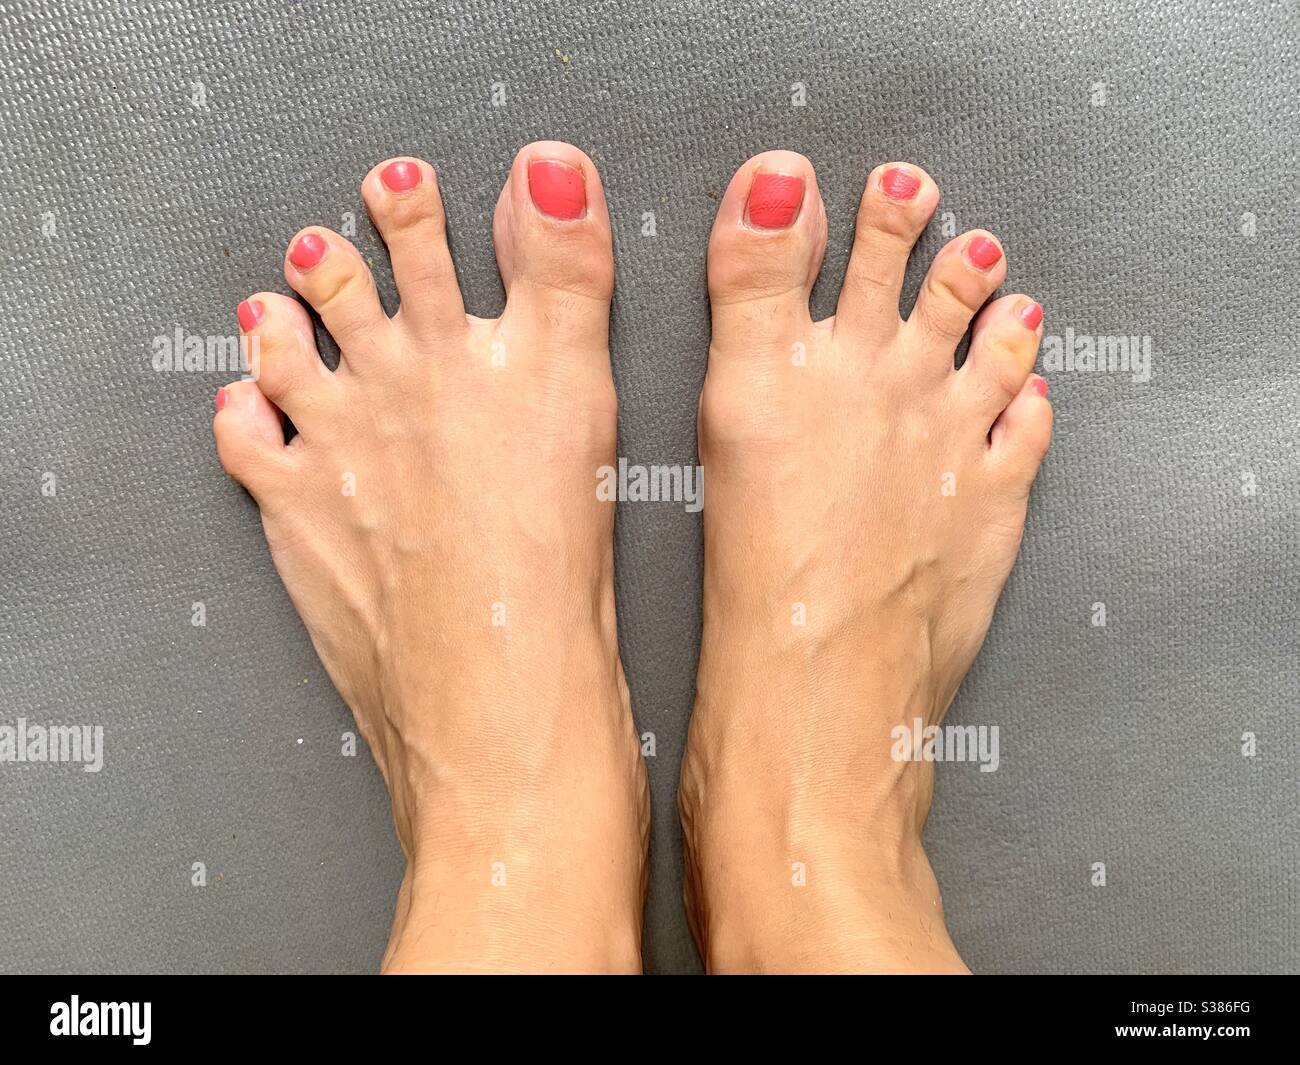 Long toes on woman’s feet with nail polish Stock Photo